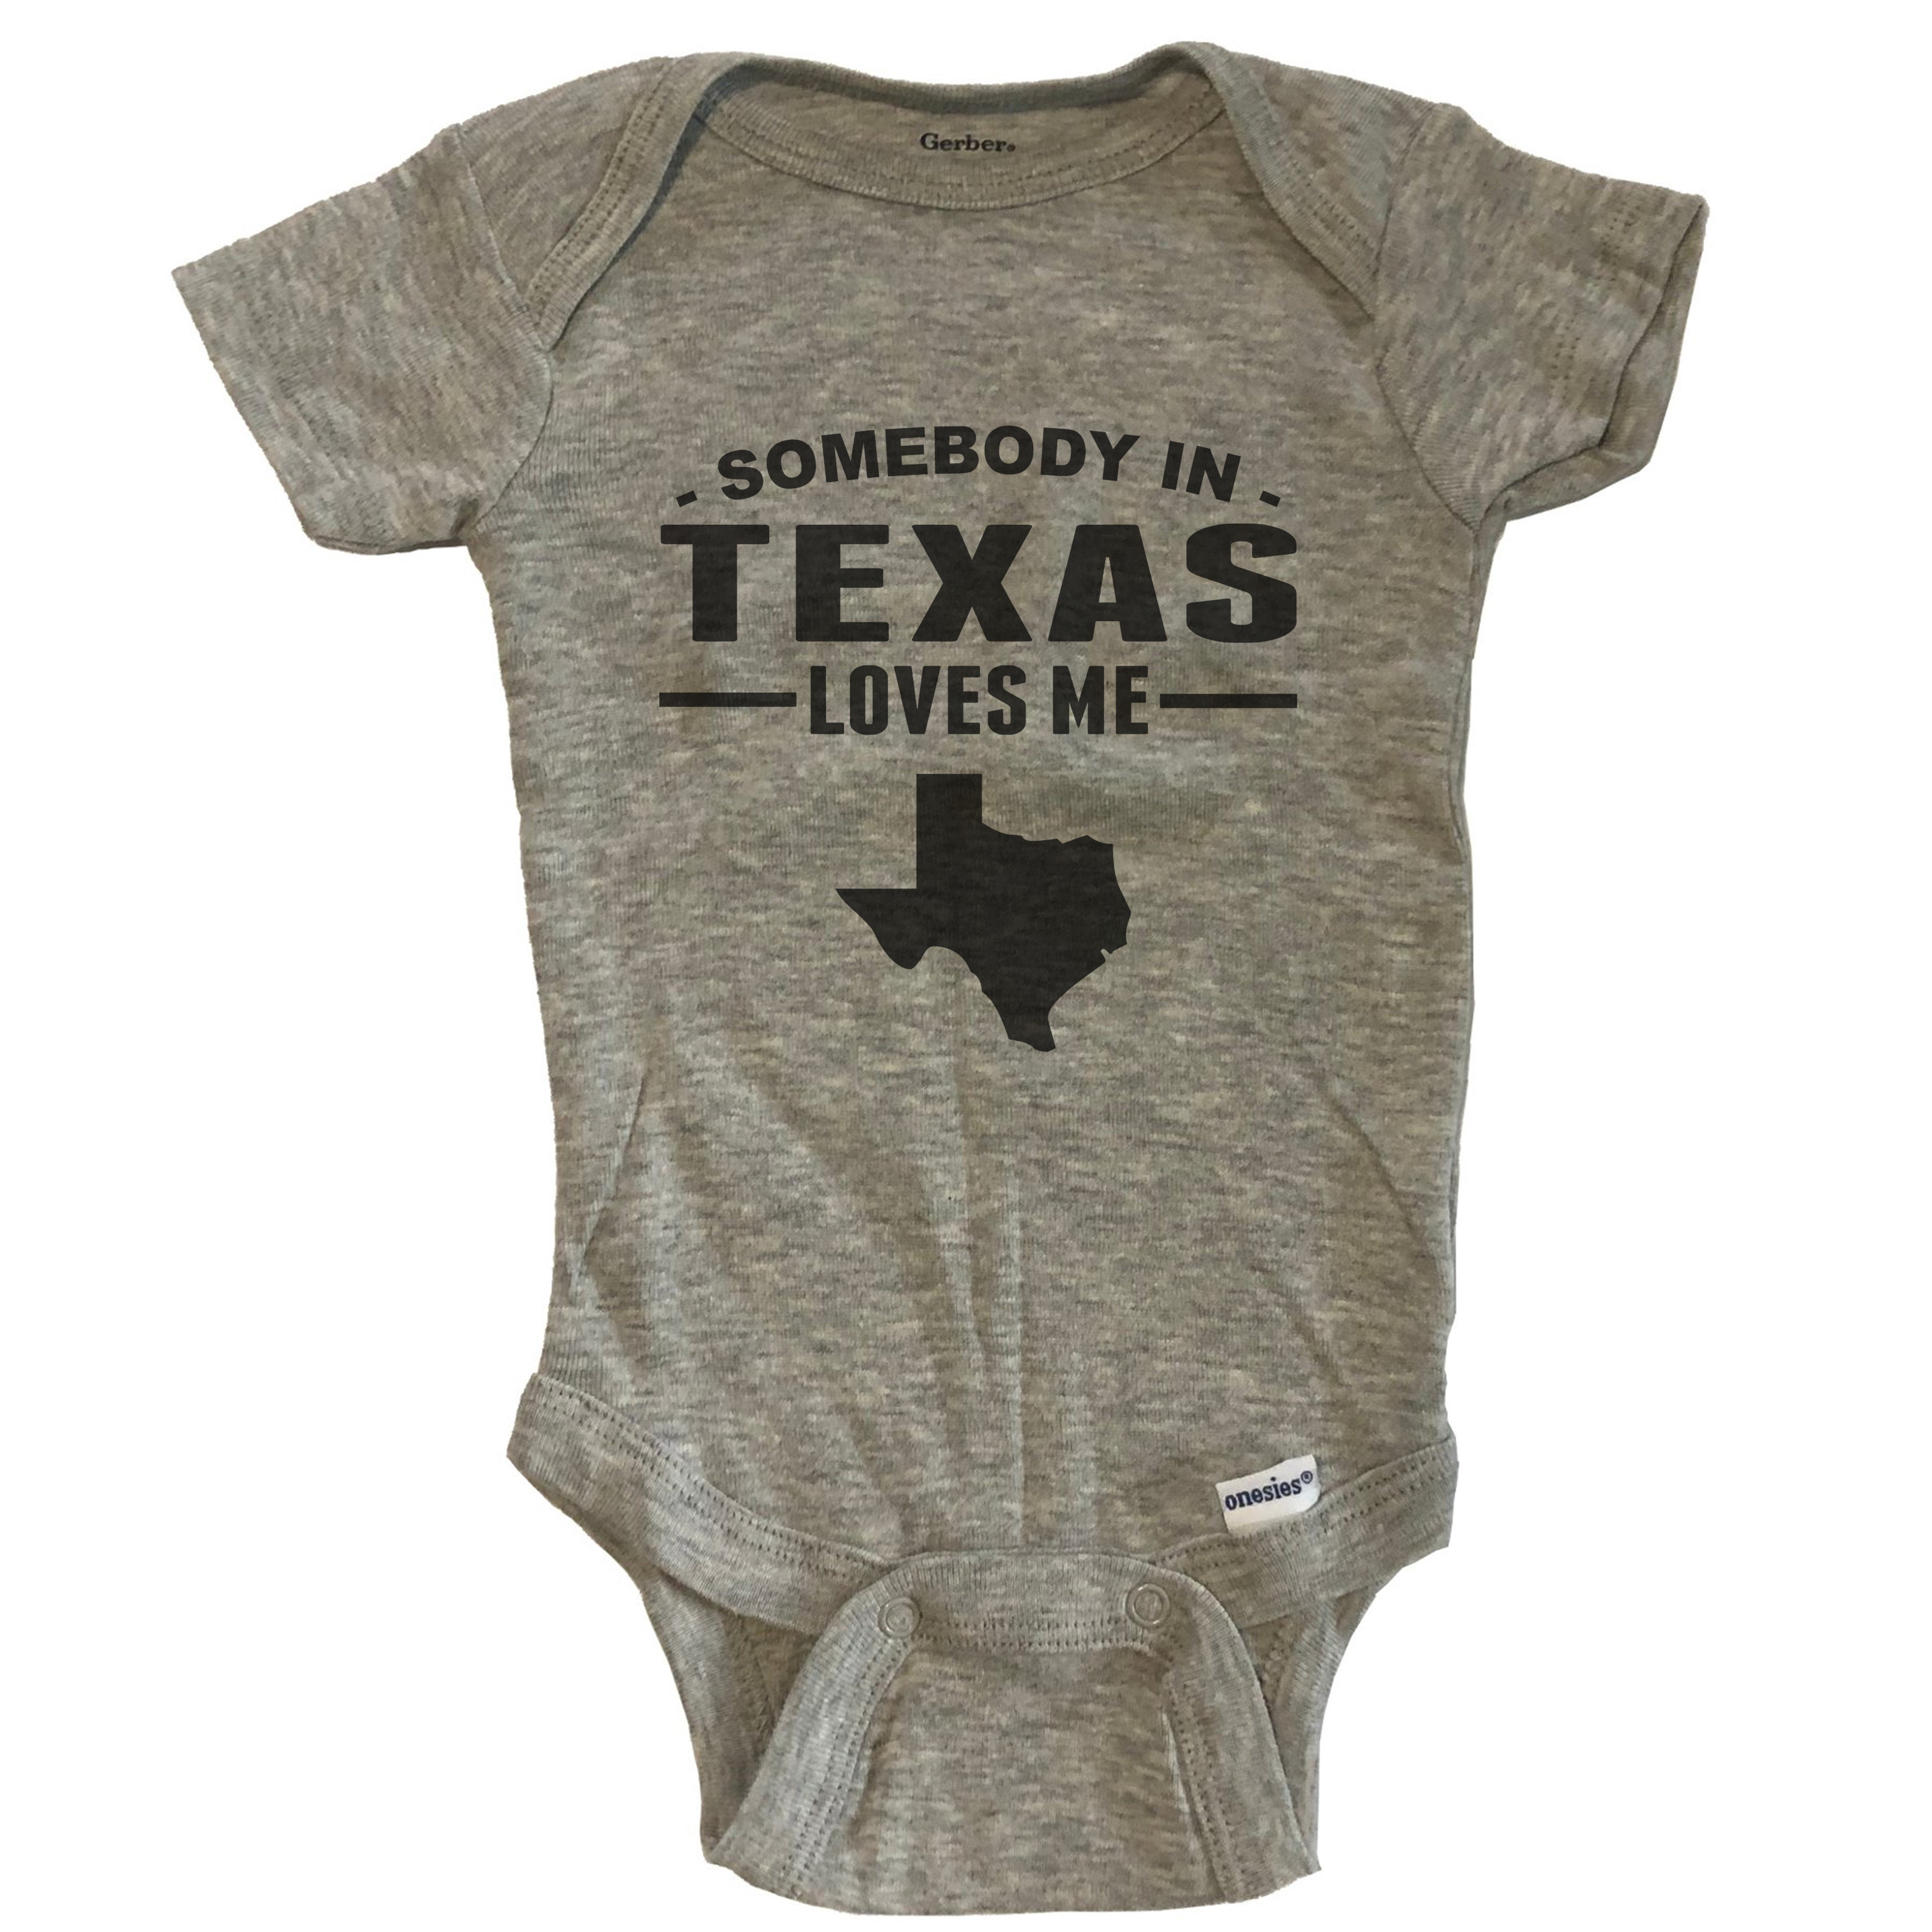 love fun T-Shirt or Bodysuit I HEART TEXAS 0091 funny clothing for infant toddler youth children in White Grey Pink or Blue